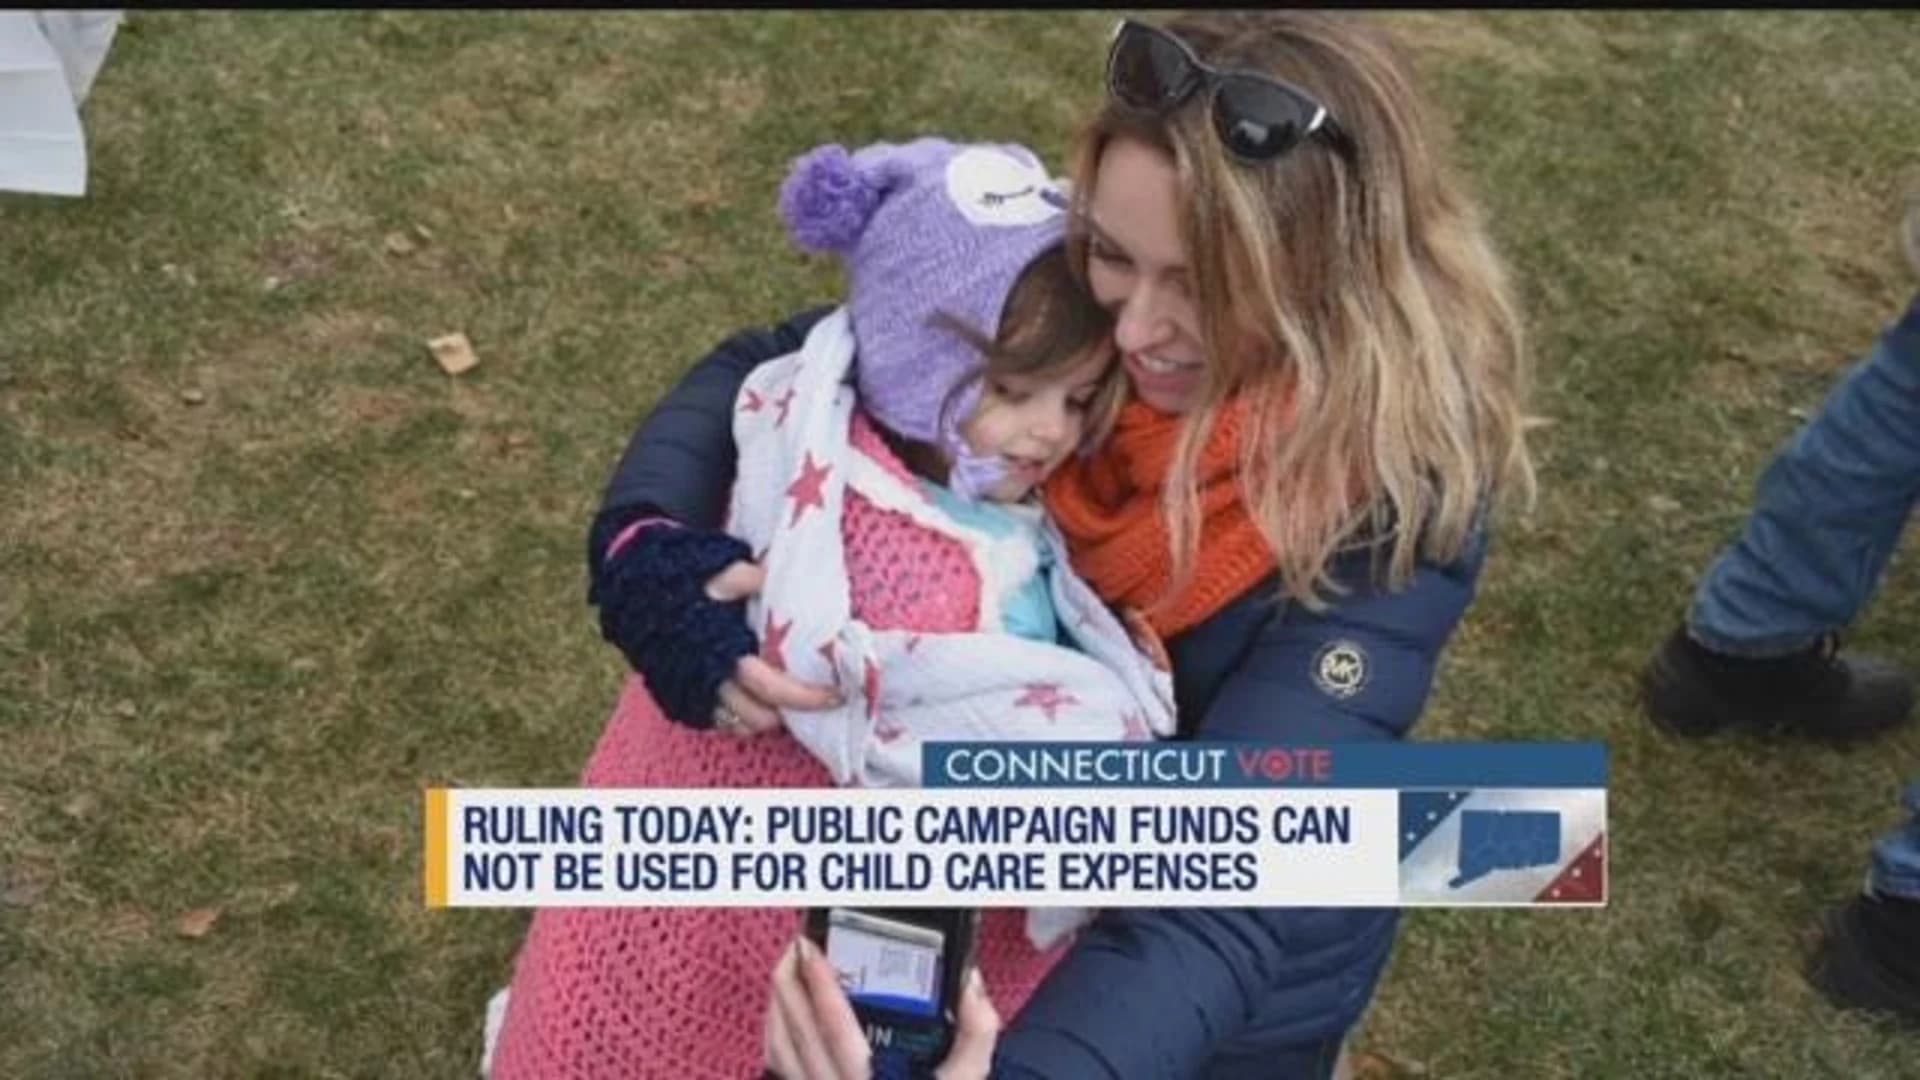 Elections Commission: Political candidates can’t use public money for child care